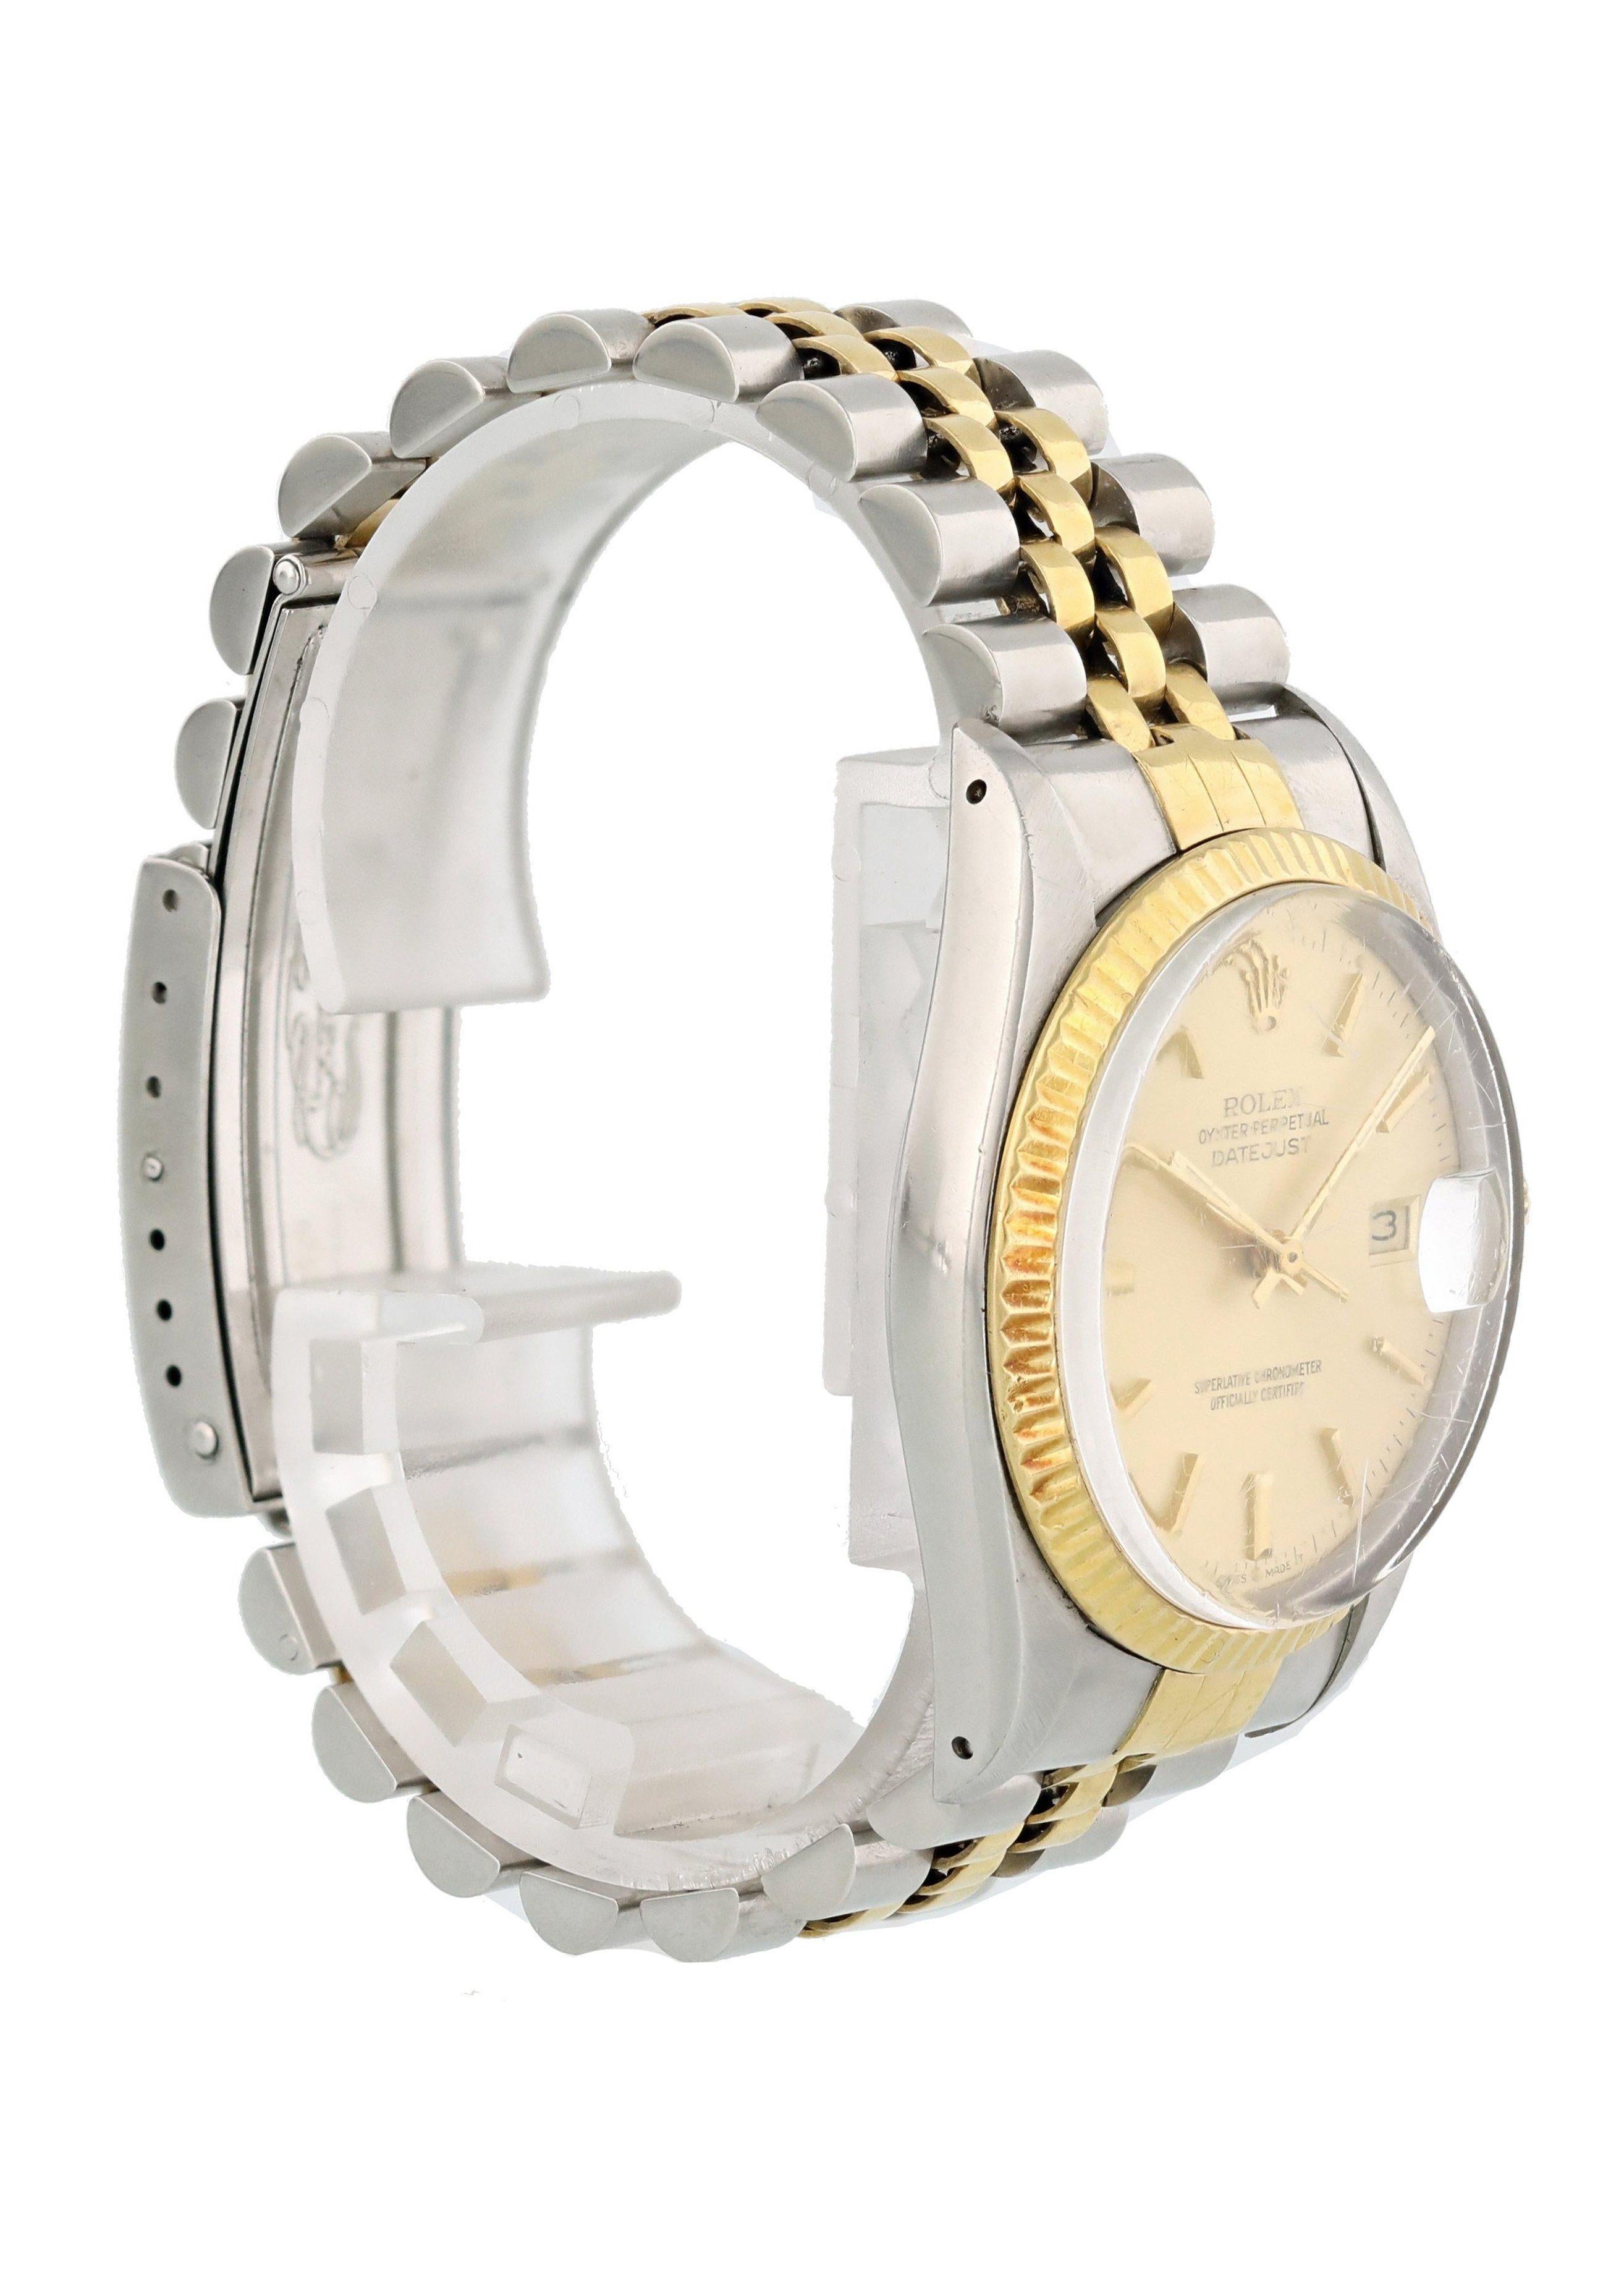 Rolex Oyster Perpetual Datejust 16013 Mens Watch. Stainless steel 36mm case. 18k yellow gold fluted bezel. Champagne dial with gold hands and stick index markers. Date display at the 3 o'clock position. 18k yellow gold and stainless steel bracelet